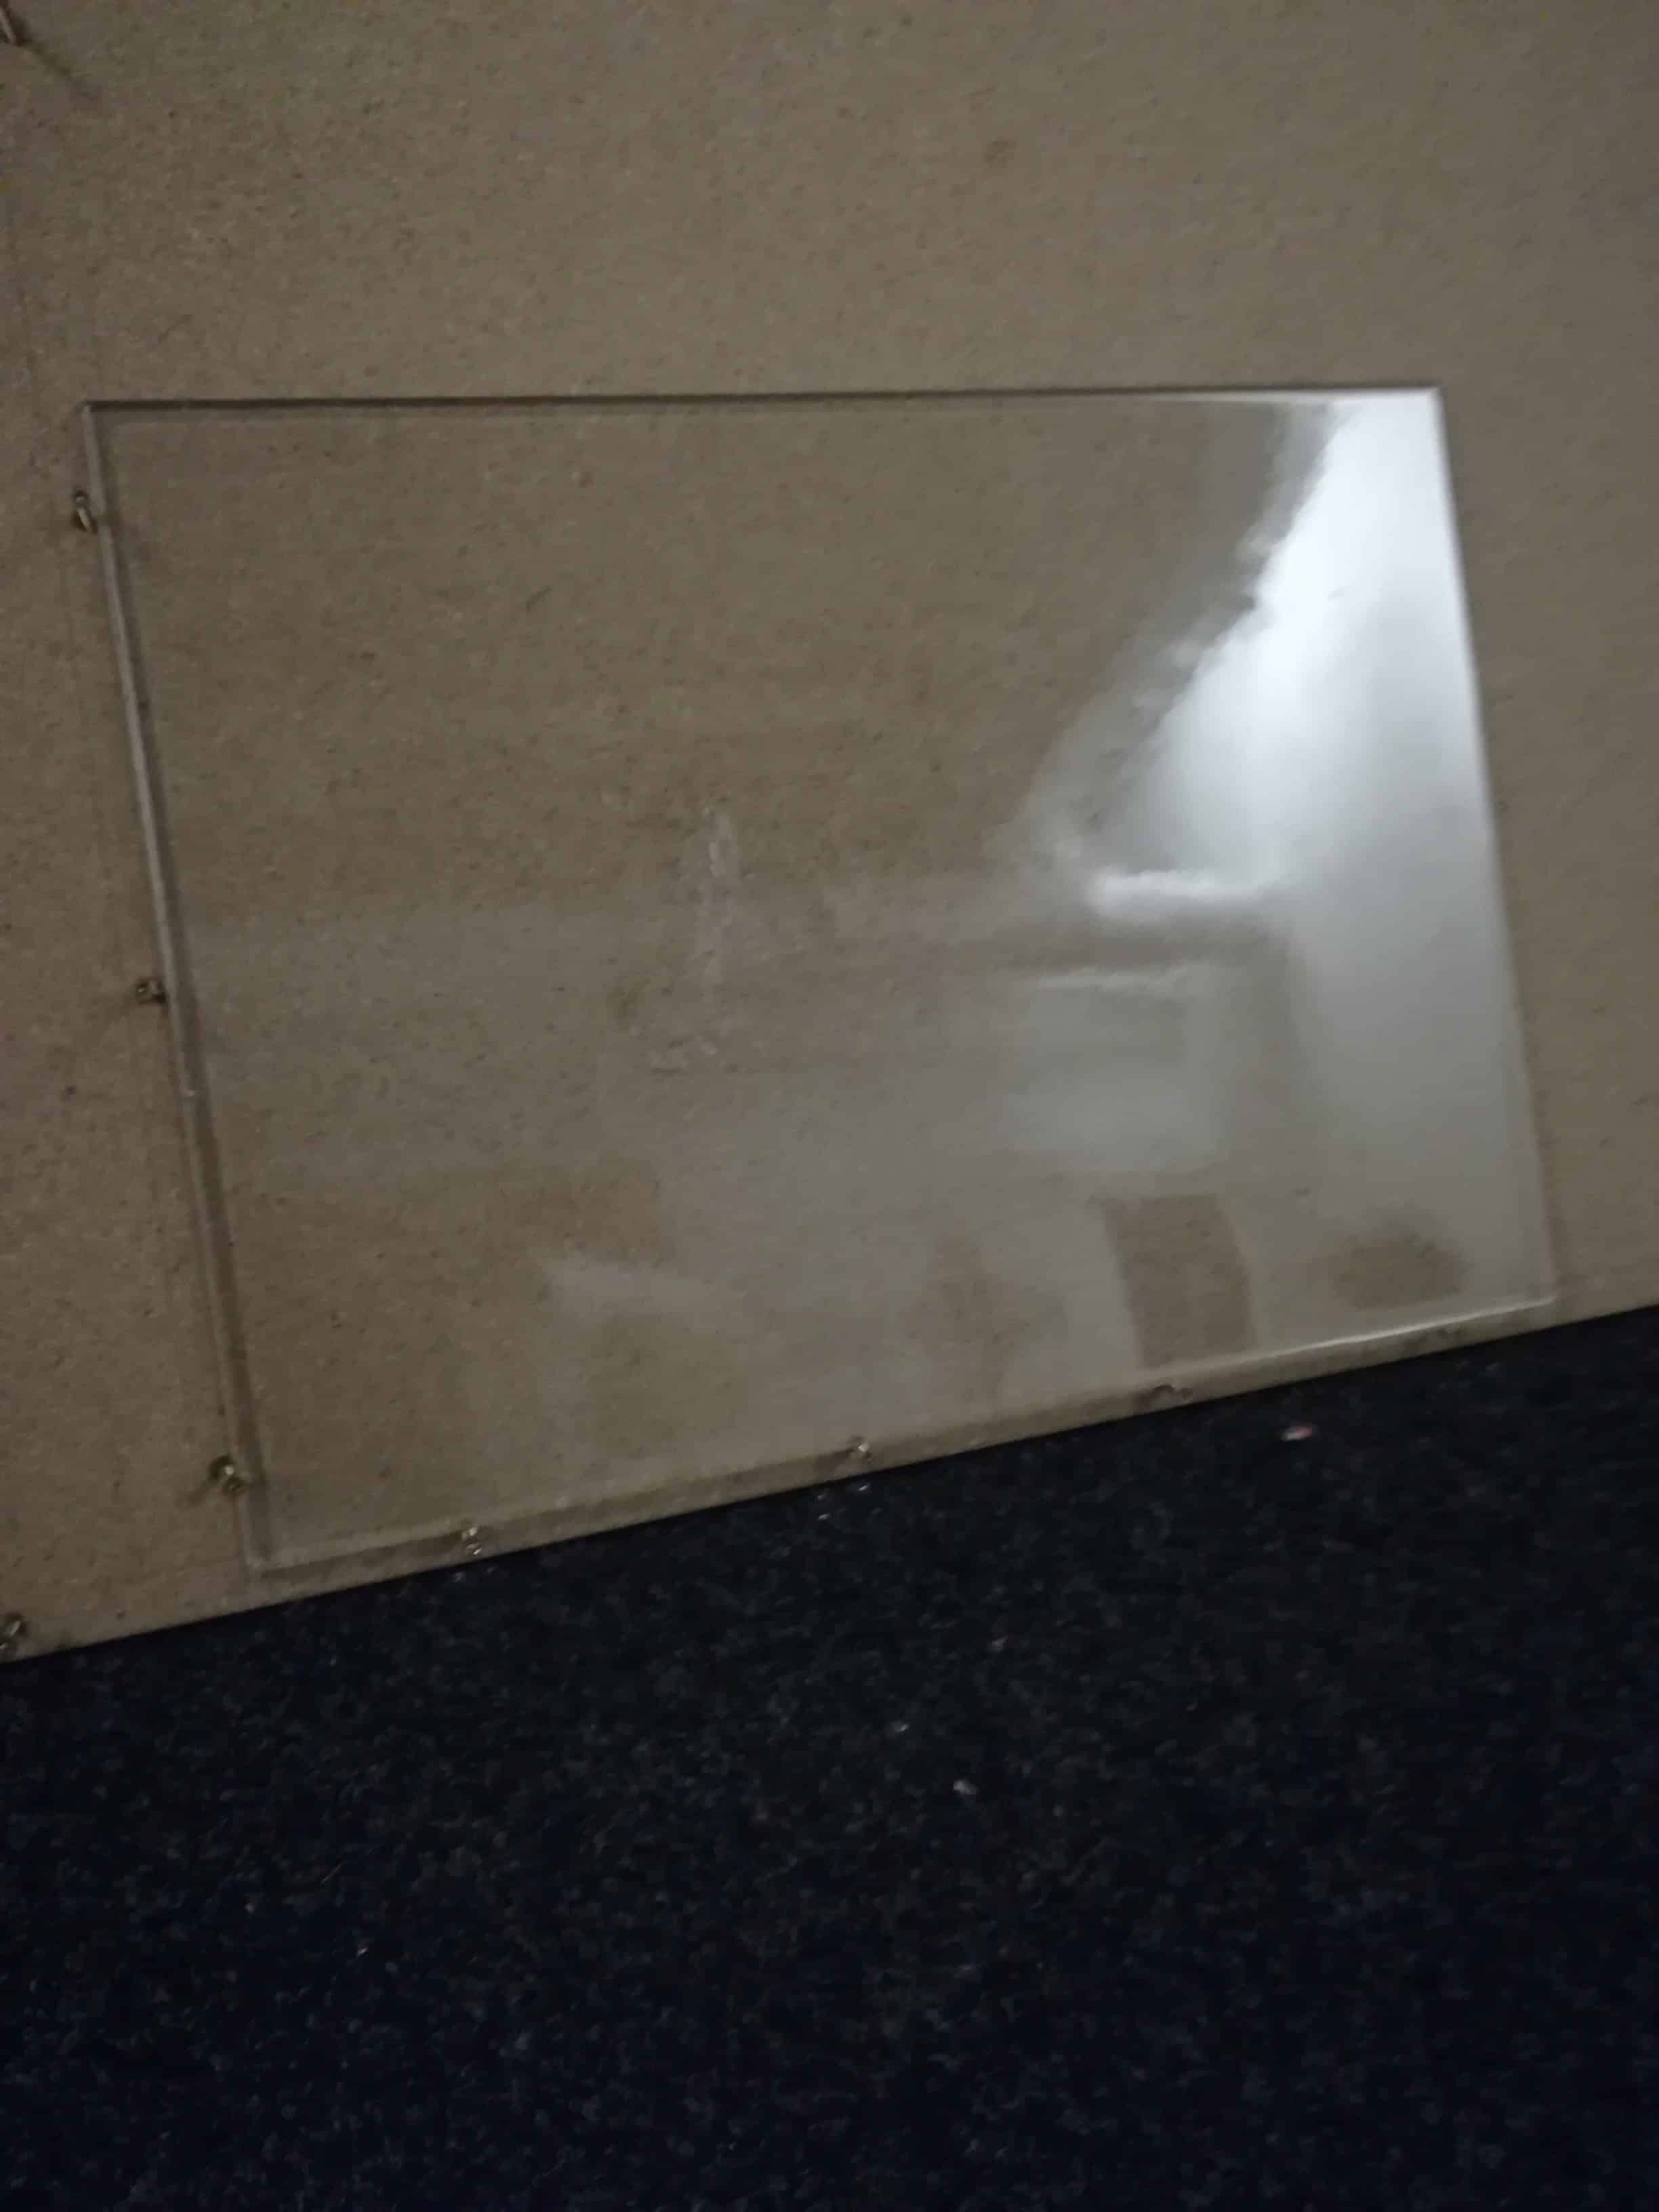 Sugar glass pane or window for TV, film and video. Sugar glass squares 33 x 45 cm.